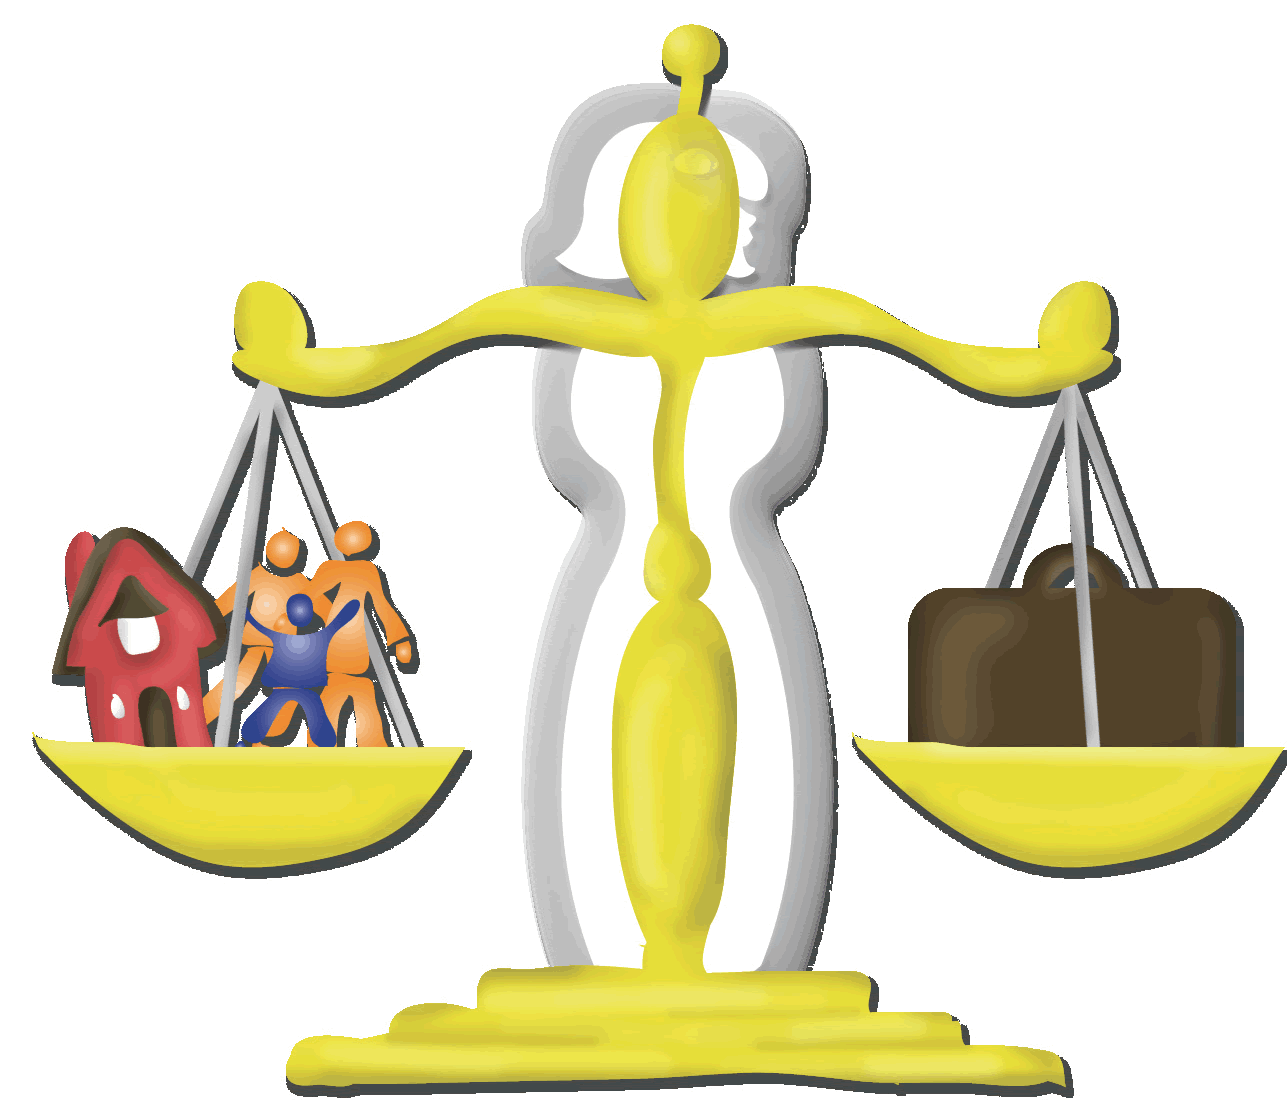 Government clipart court clerk. Legal terminology image of